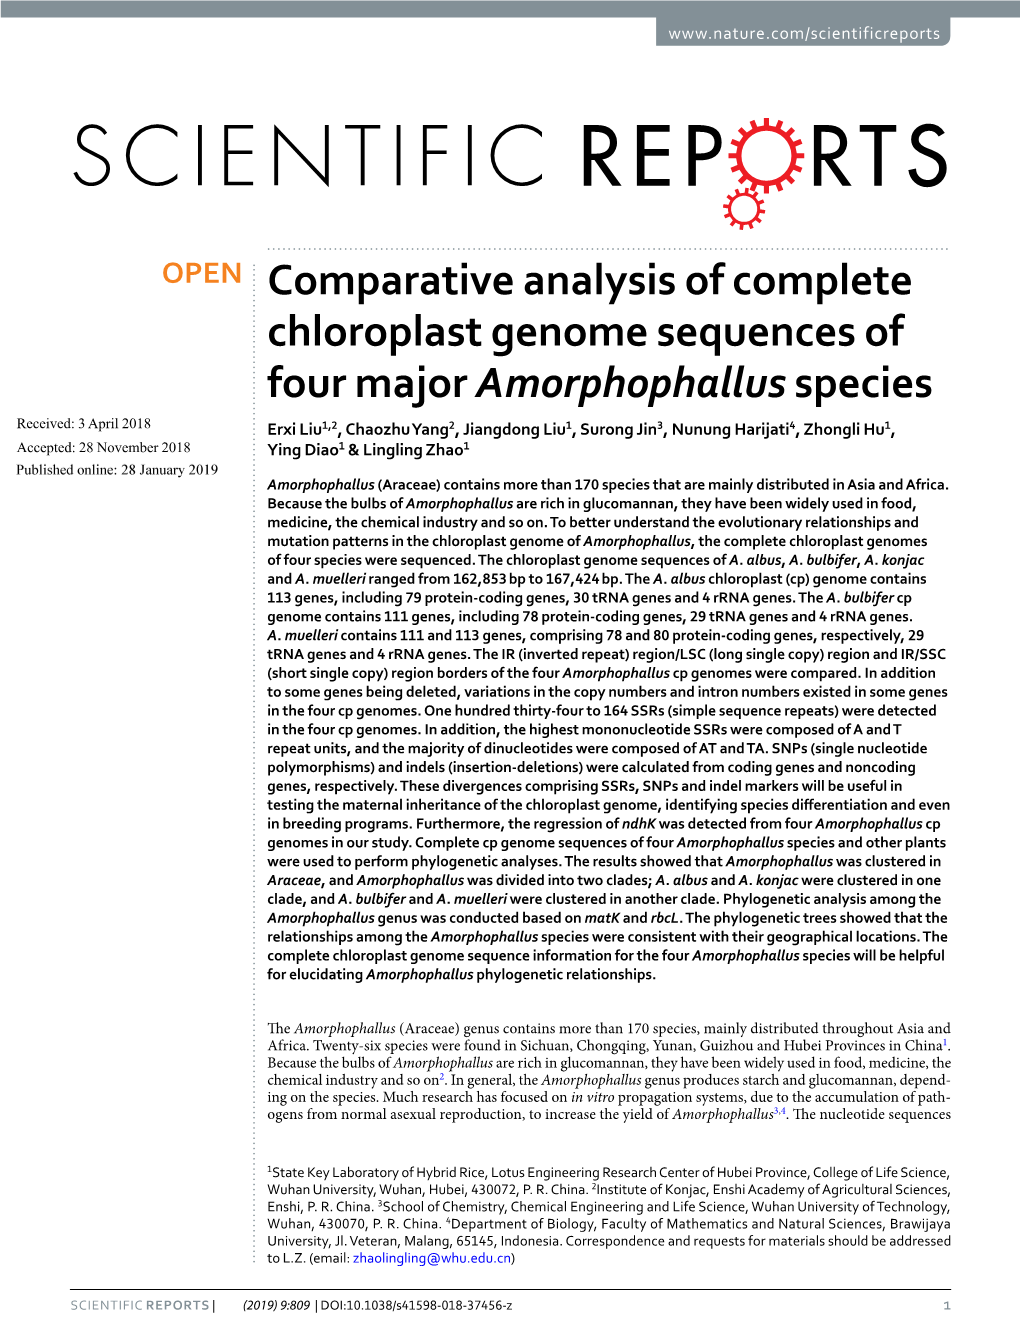 Comparative Analysis of Complete Chloroplast Genome Sequences of Four Major Amorphophallus Species